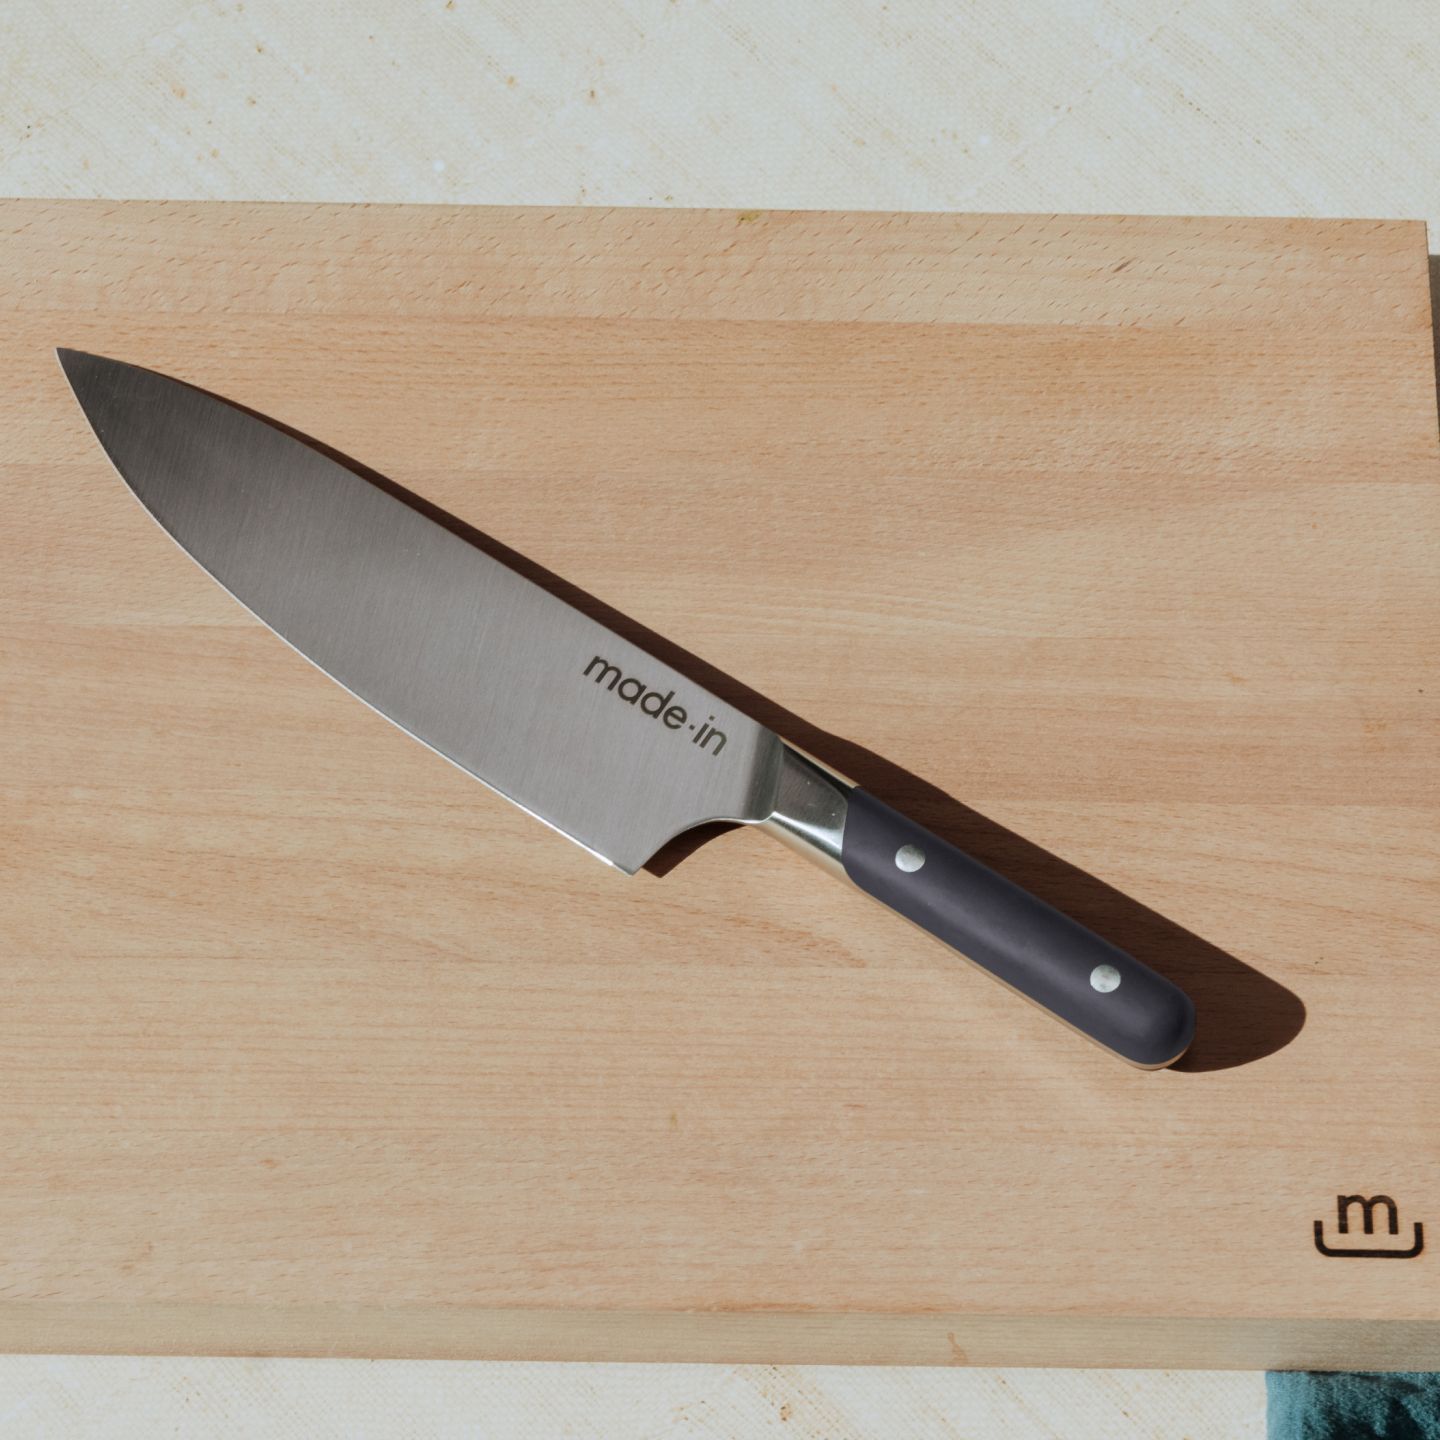 What is a Chef Knife Used For? - Made In